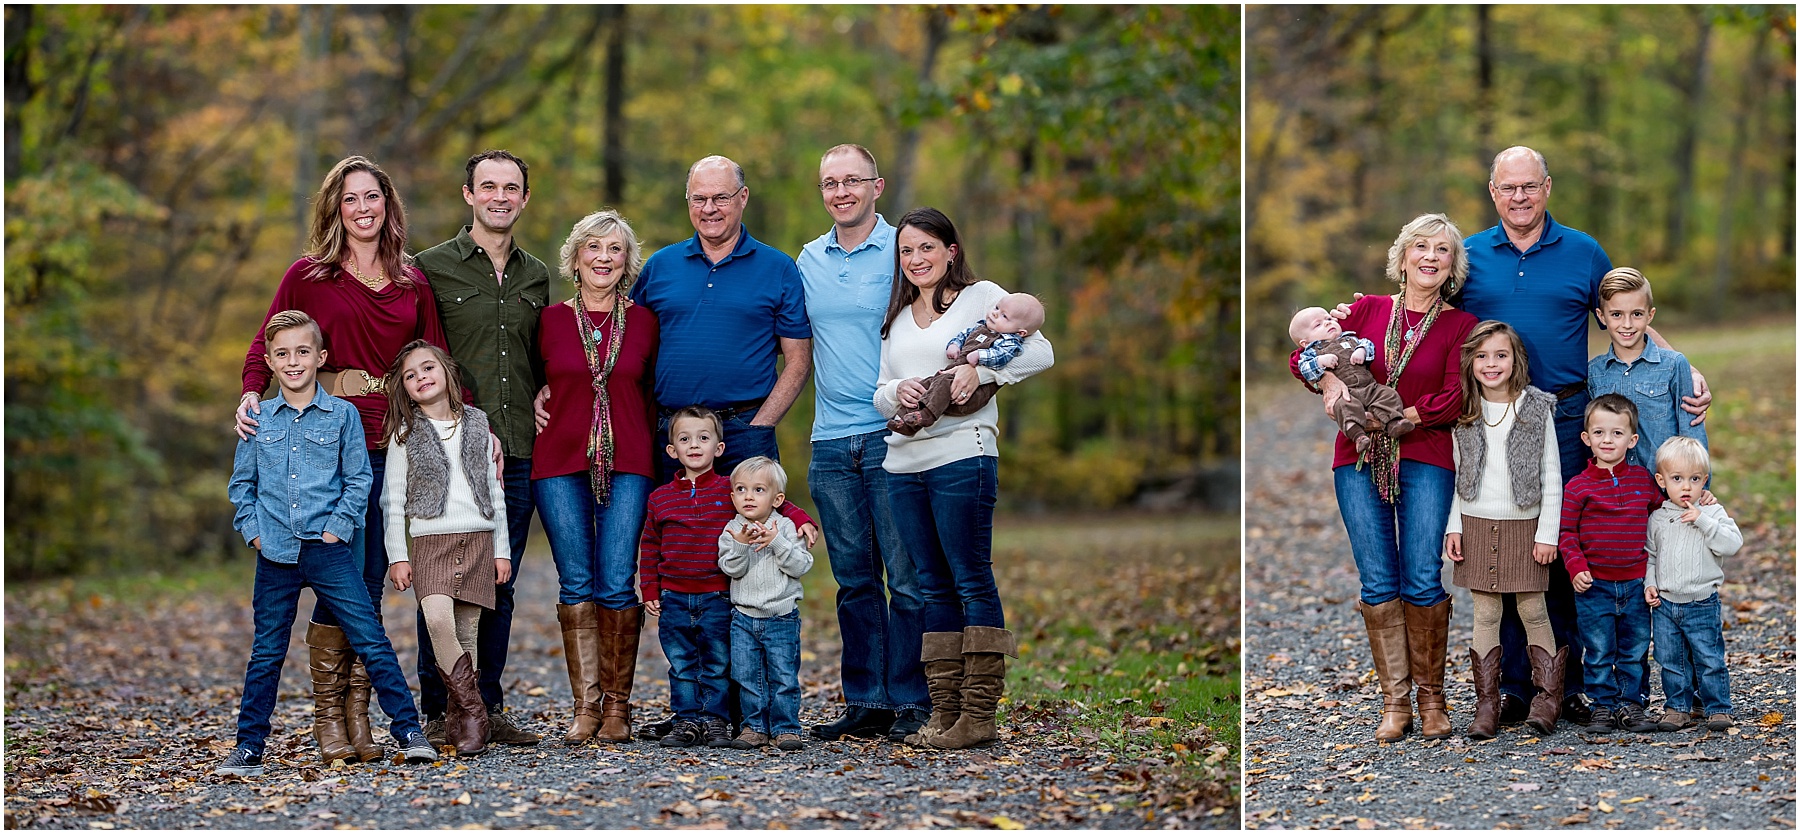 Silver Orchid Photography, Family Photography, Family Session, Outdoor Session, Extended Family Session, Green Lane Park, Green Lane, PA, Fall Sessions